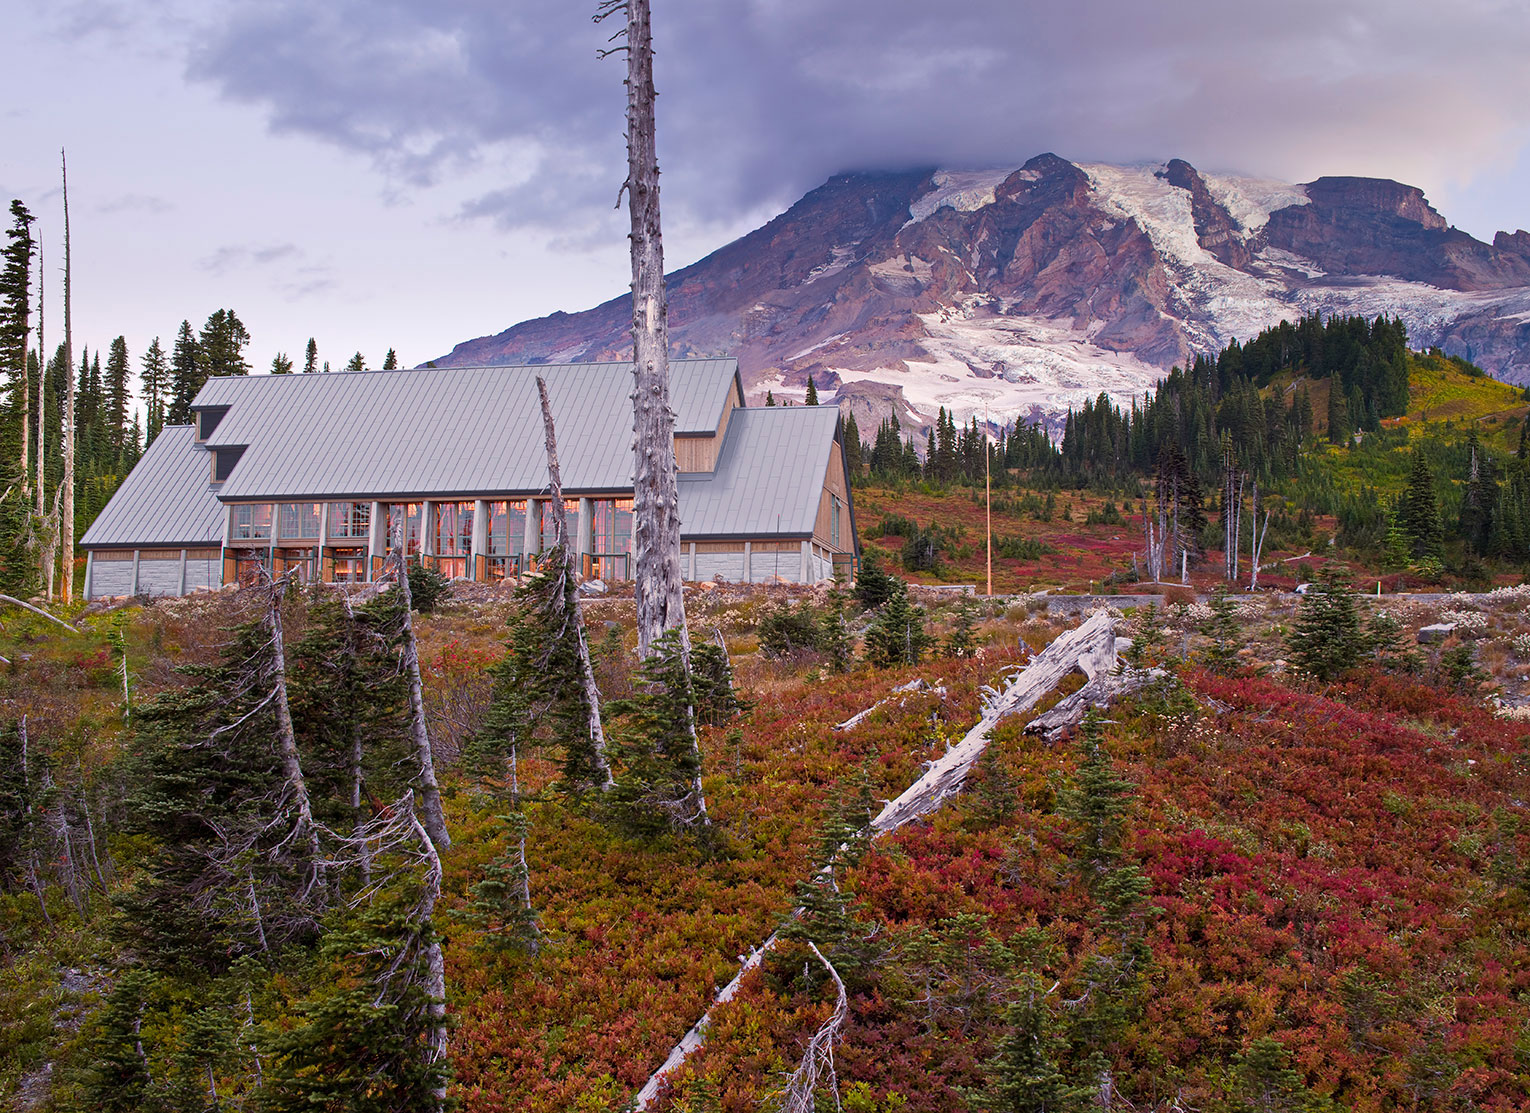 An alpine forest with hard-weathered trees at the base of Mt. Rainer framing the the Henry M. Jackson Memorial Visitor Center.